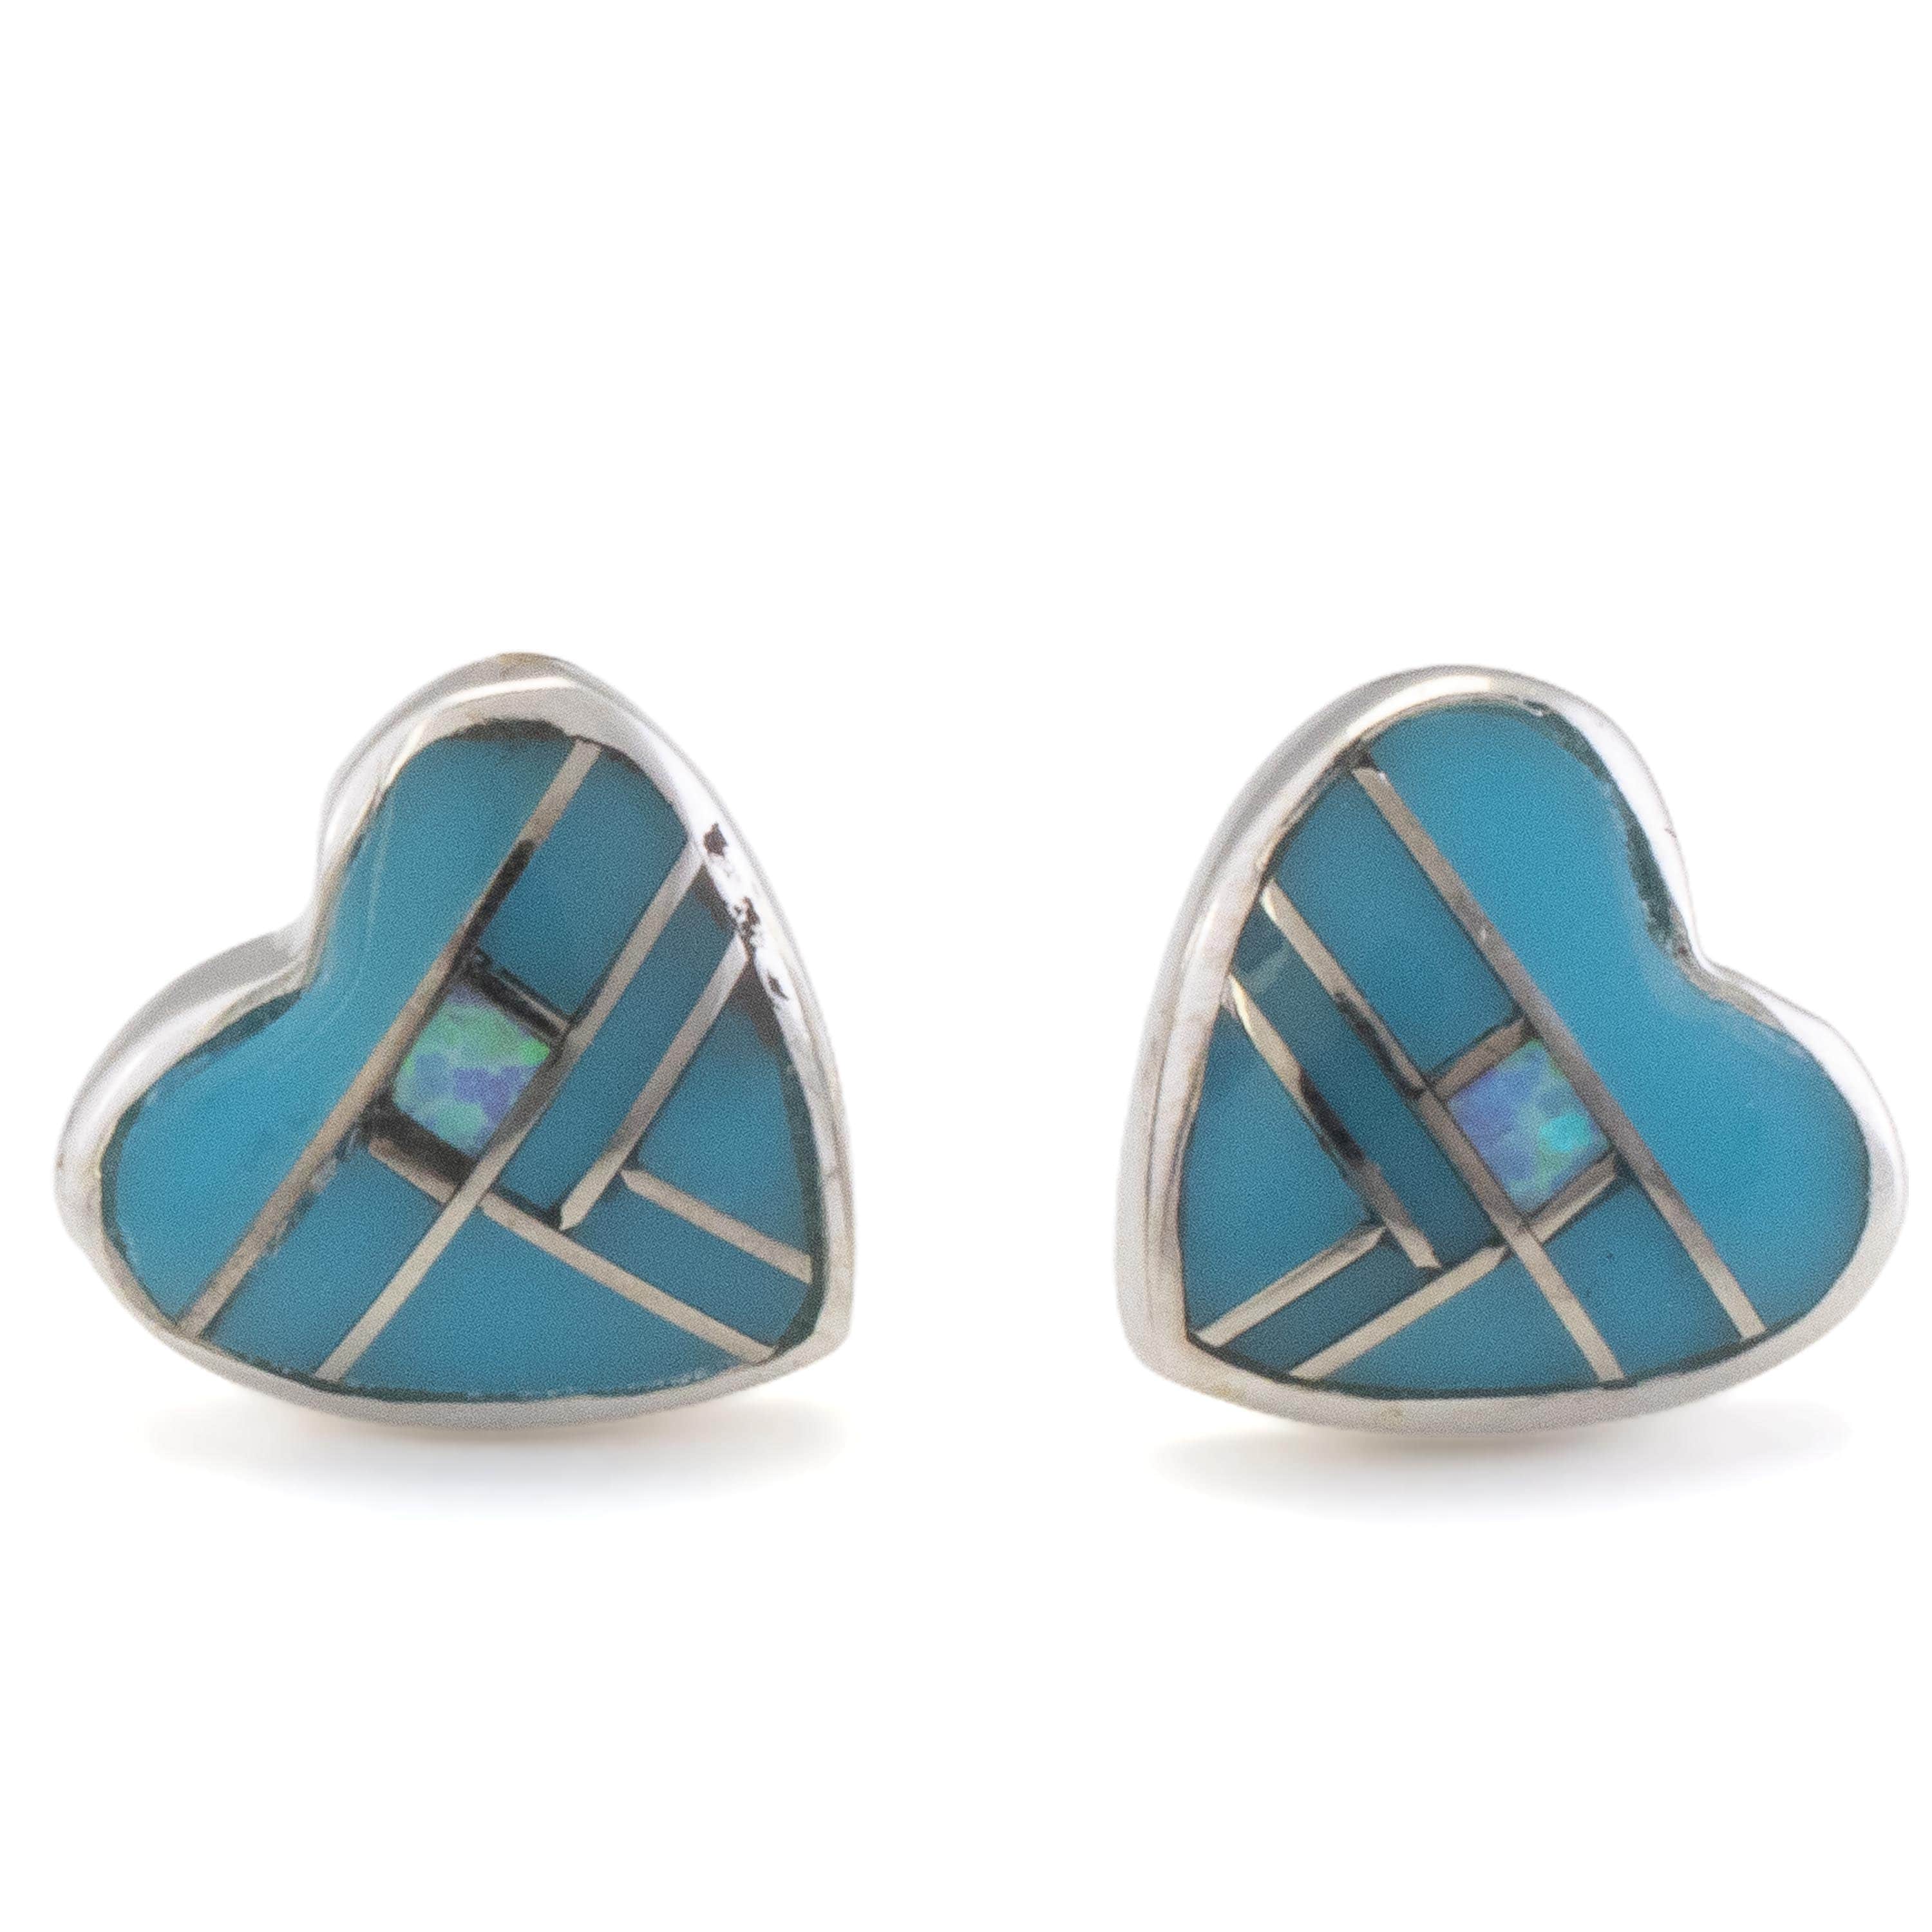 Kalifano Southwest Silver Jewelry Turquoise Heart 925 Sterling Silver Earring with Stud Backing USA Handmade with Opal Accent NME.2240.TQ